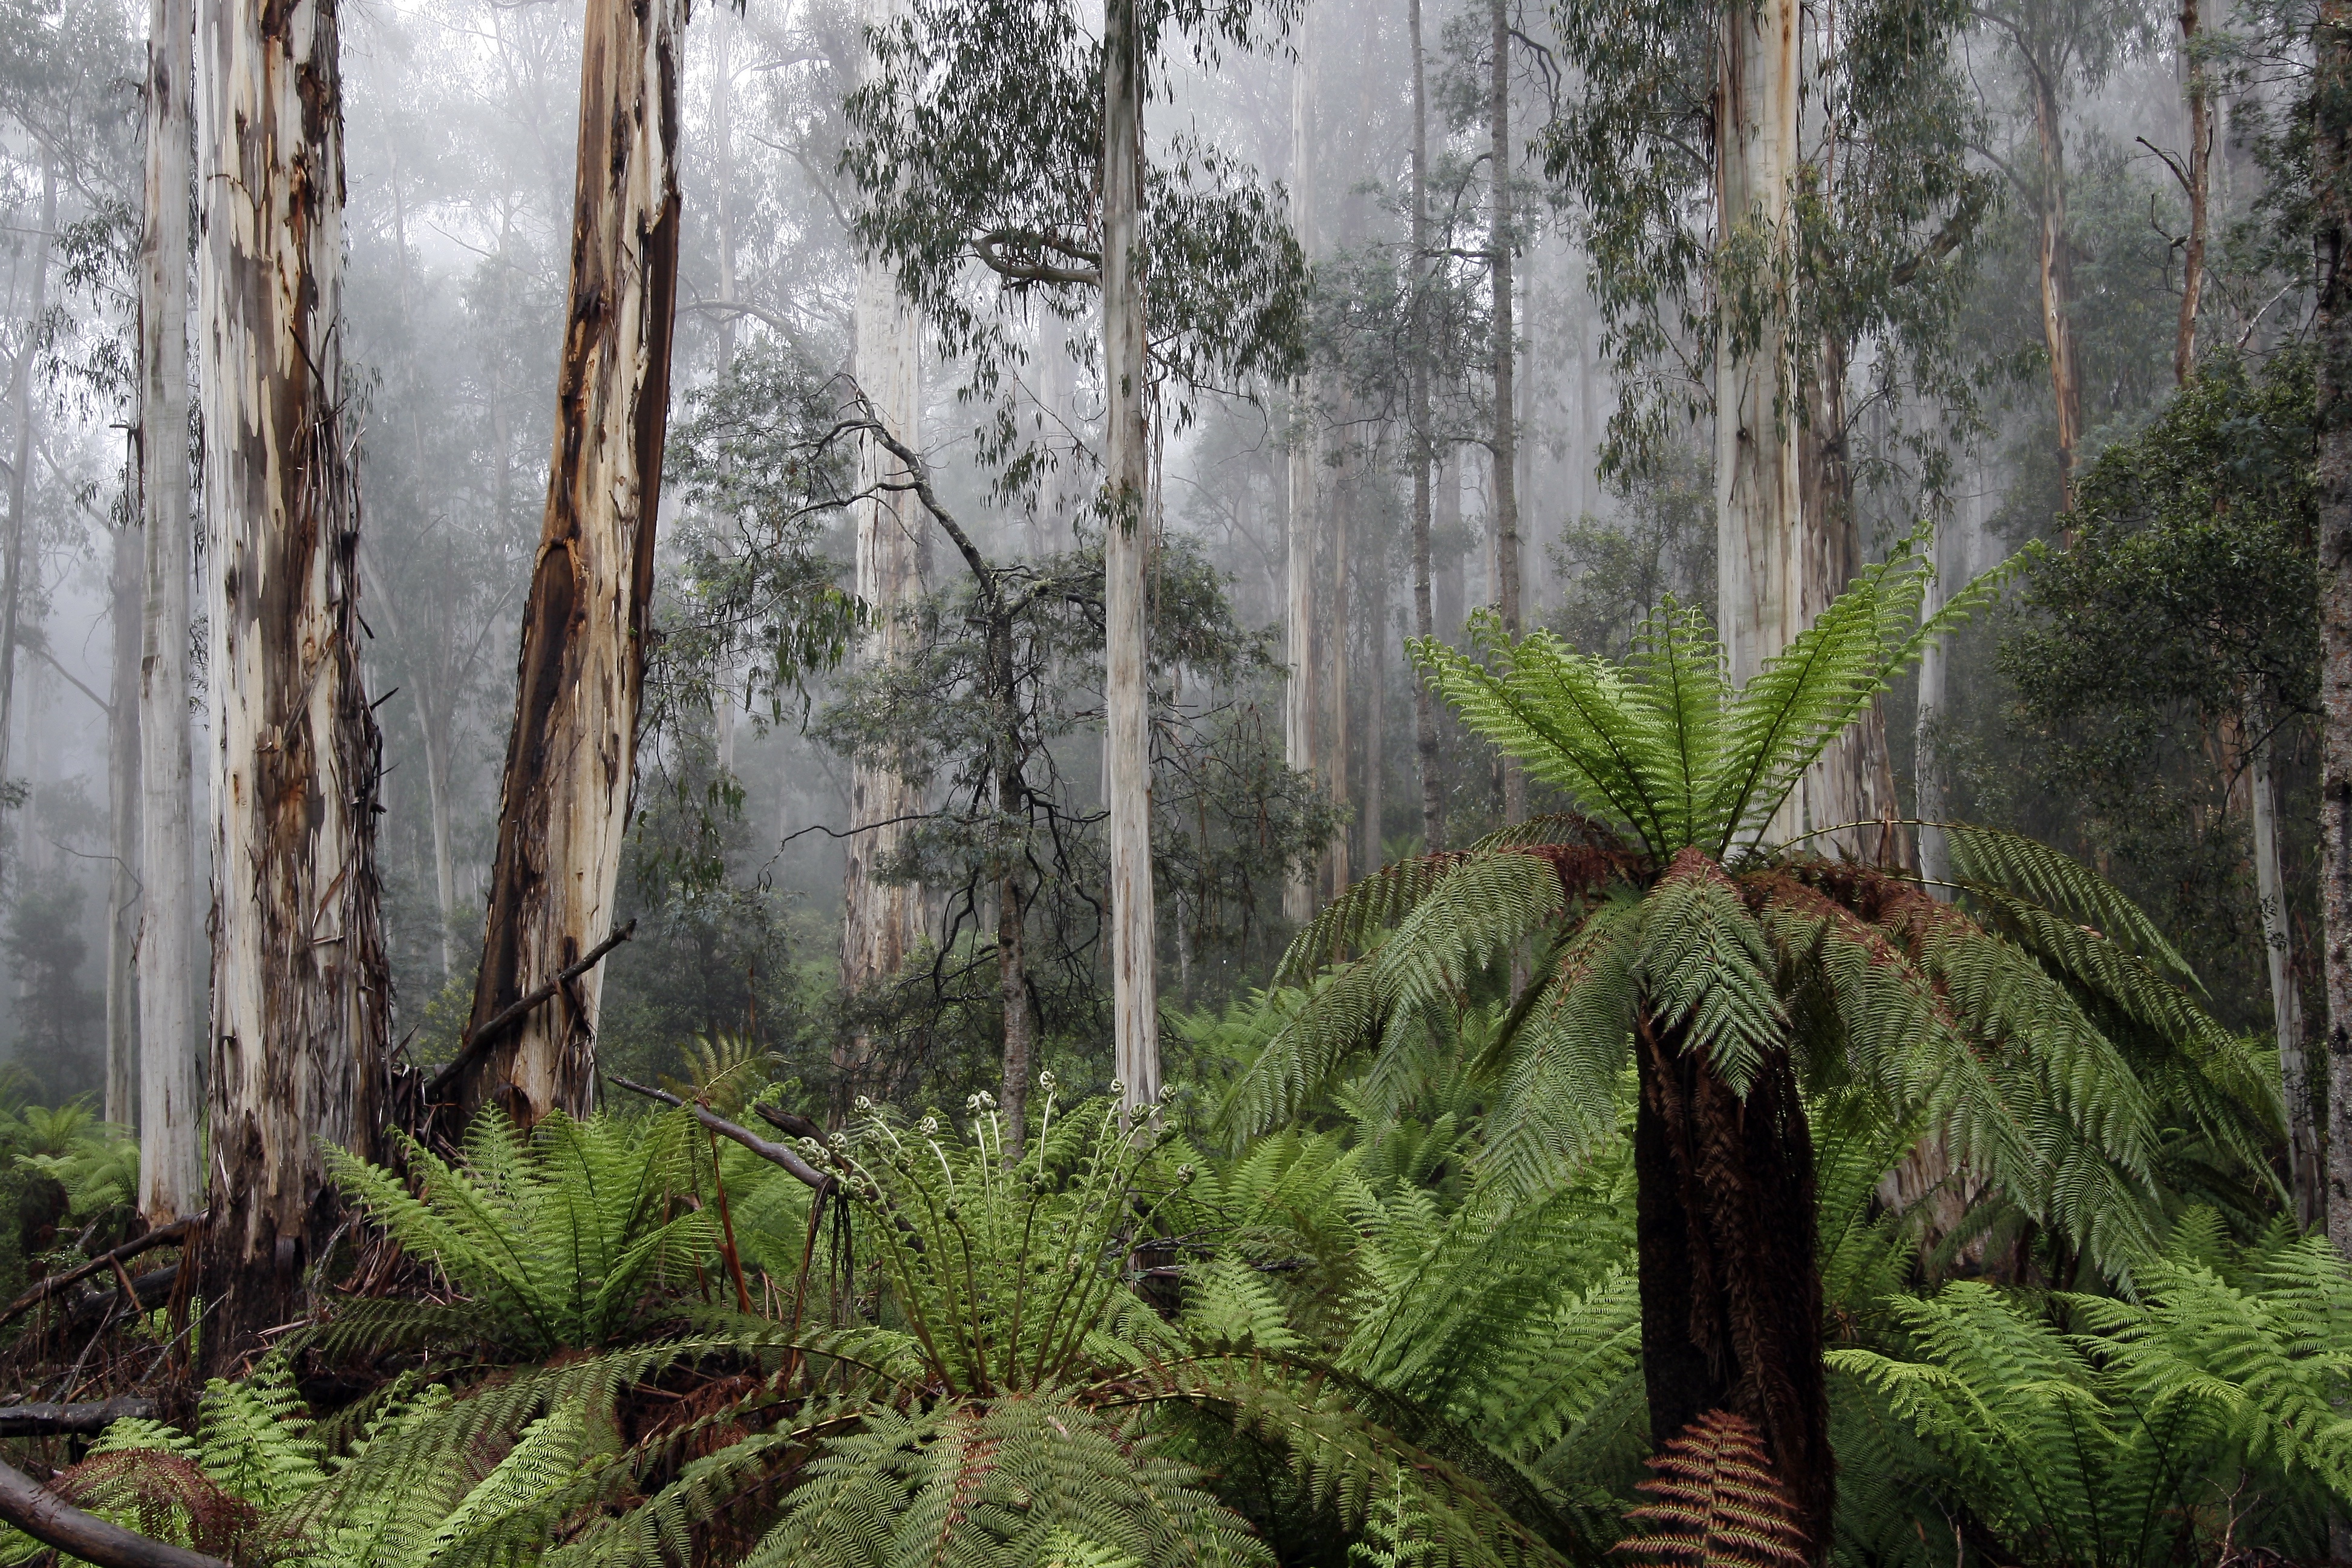 Critical Greater Glider habitat on the Errinundra plateau. Image from GECO.